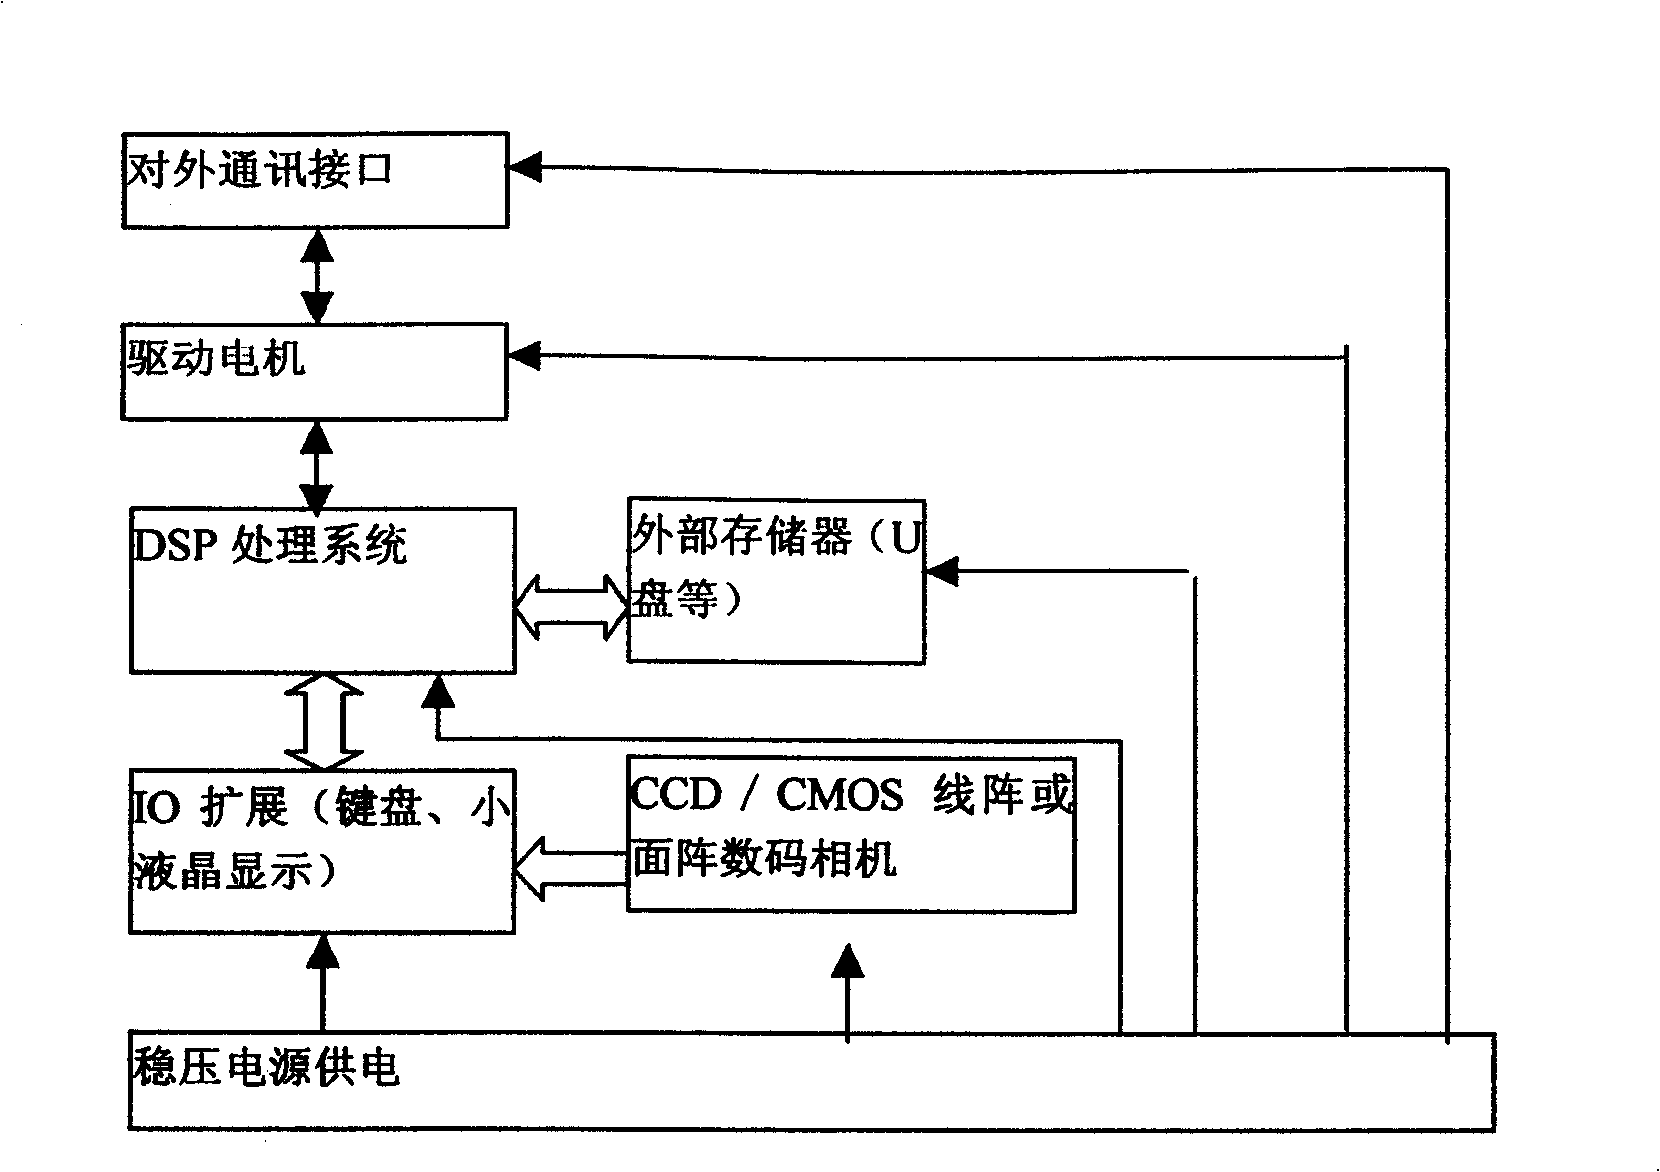 Dyeing and printing products on-line quality monitoring method based on computer pattern recognition principle